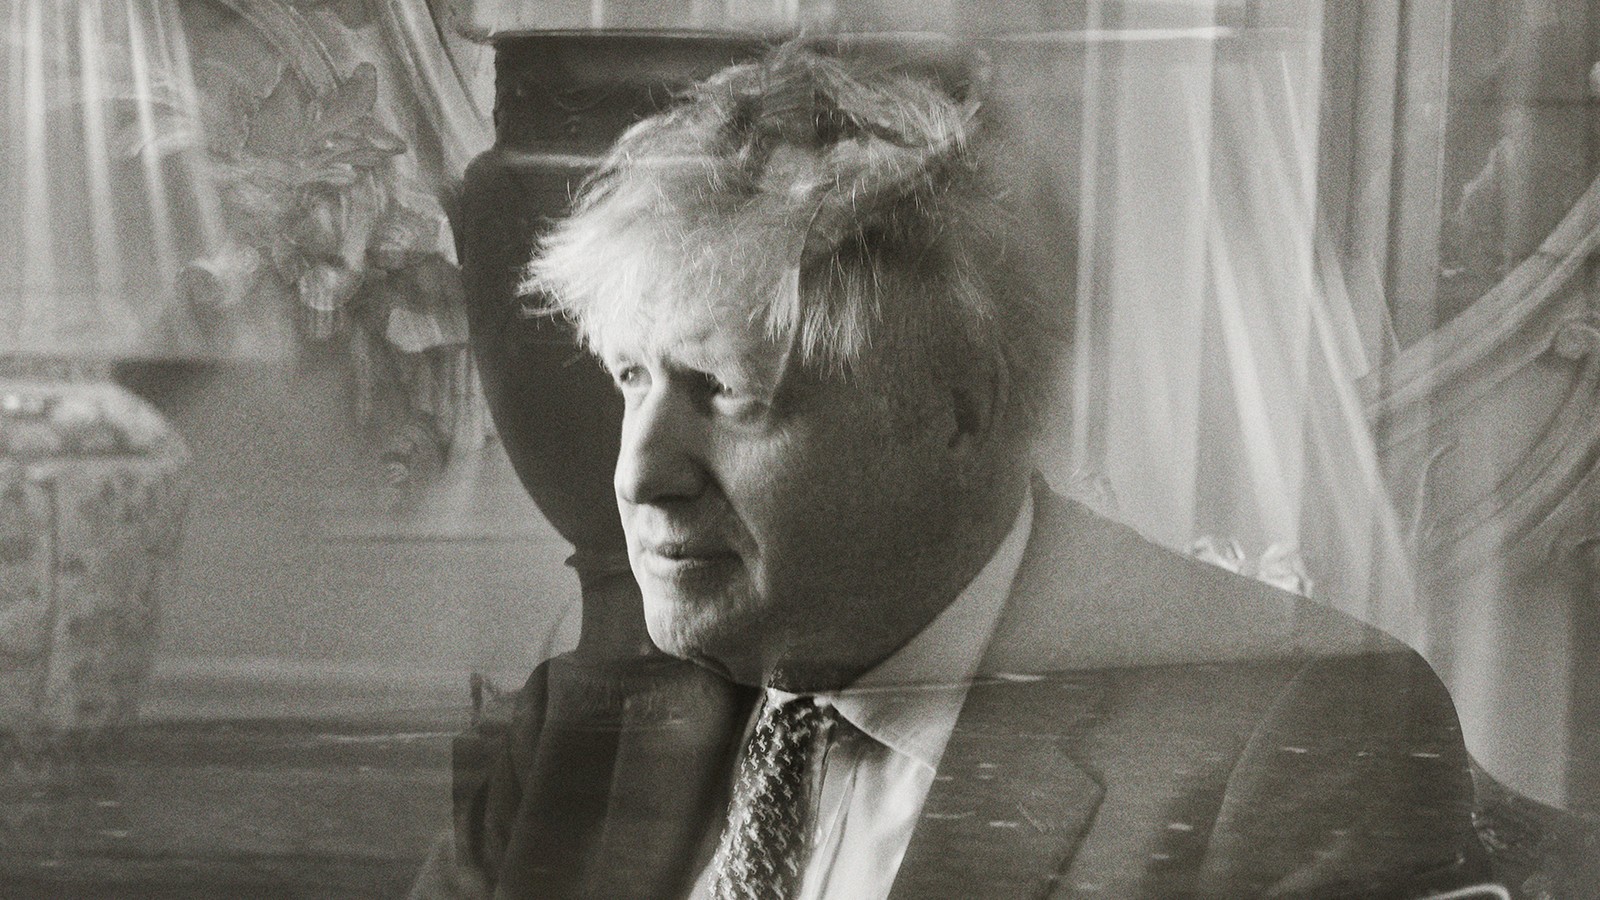 Boris Johnson's dad and sister 'had huge row' as he fought for